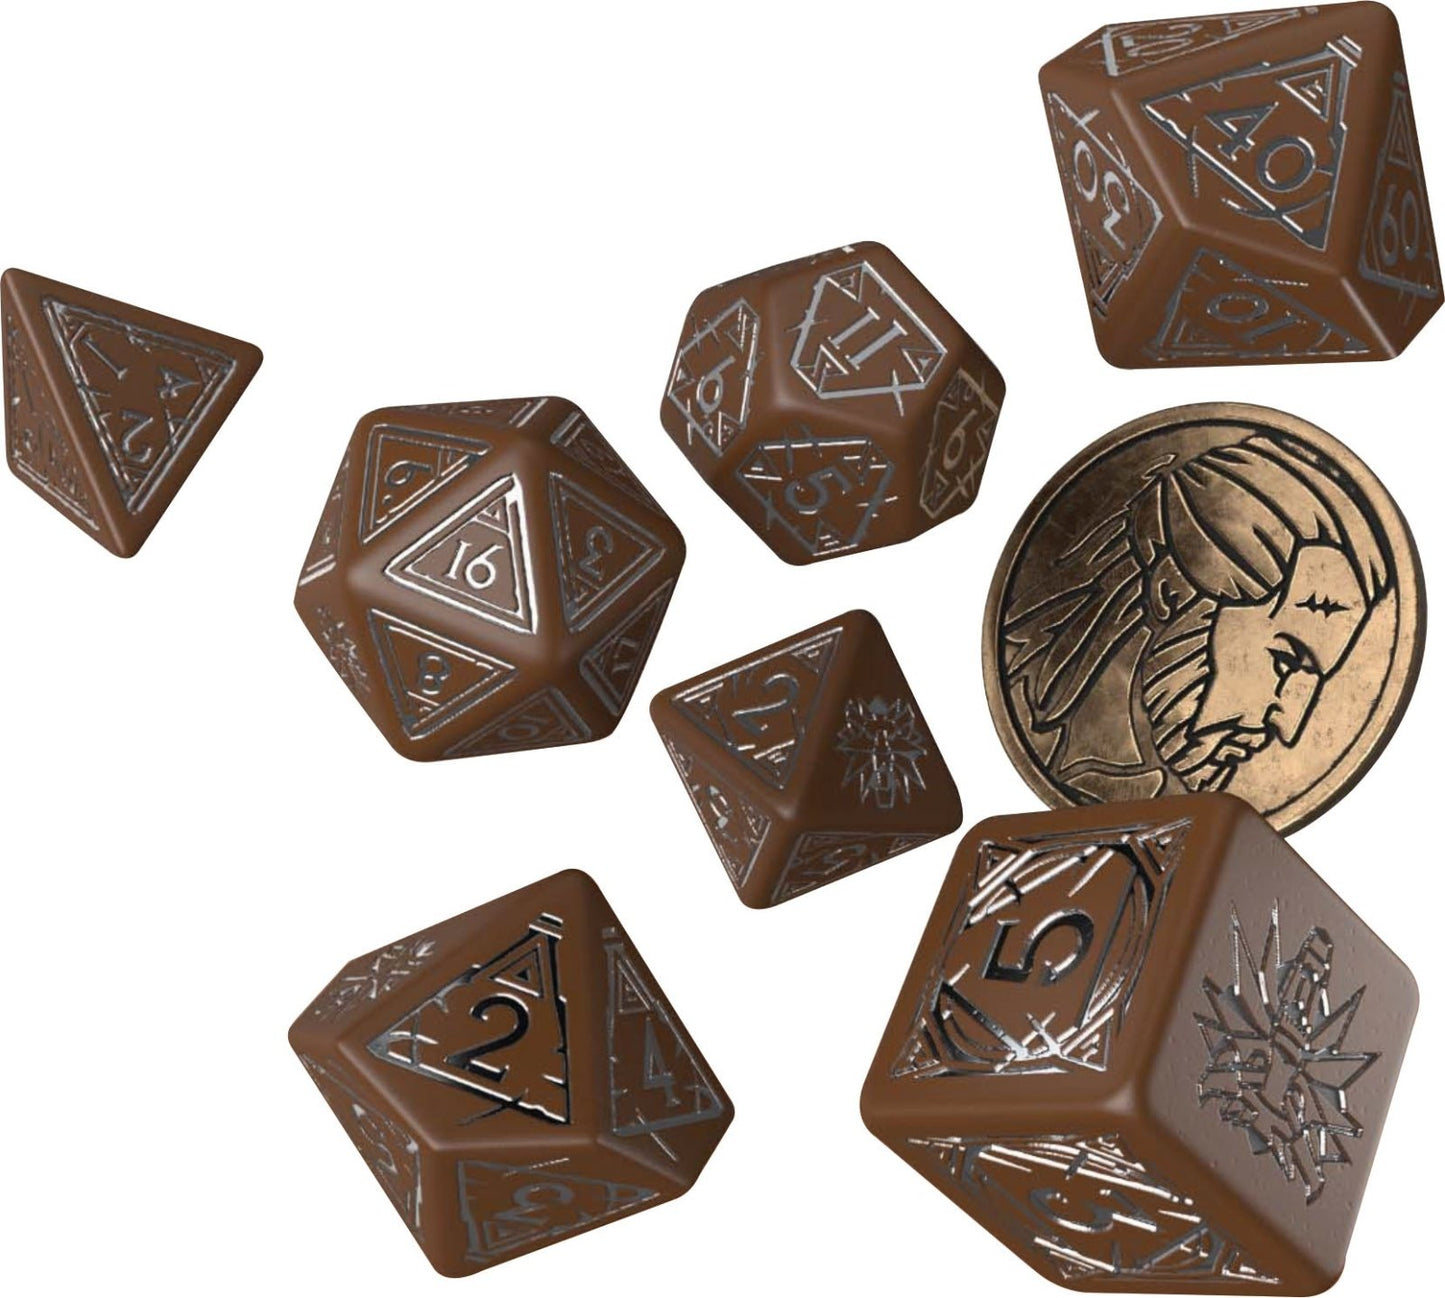 The Witcher Dice Set: Geralt - Roachs Companion (7 dice + coin) - The Fourth Place